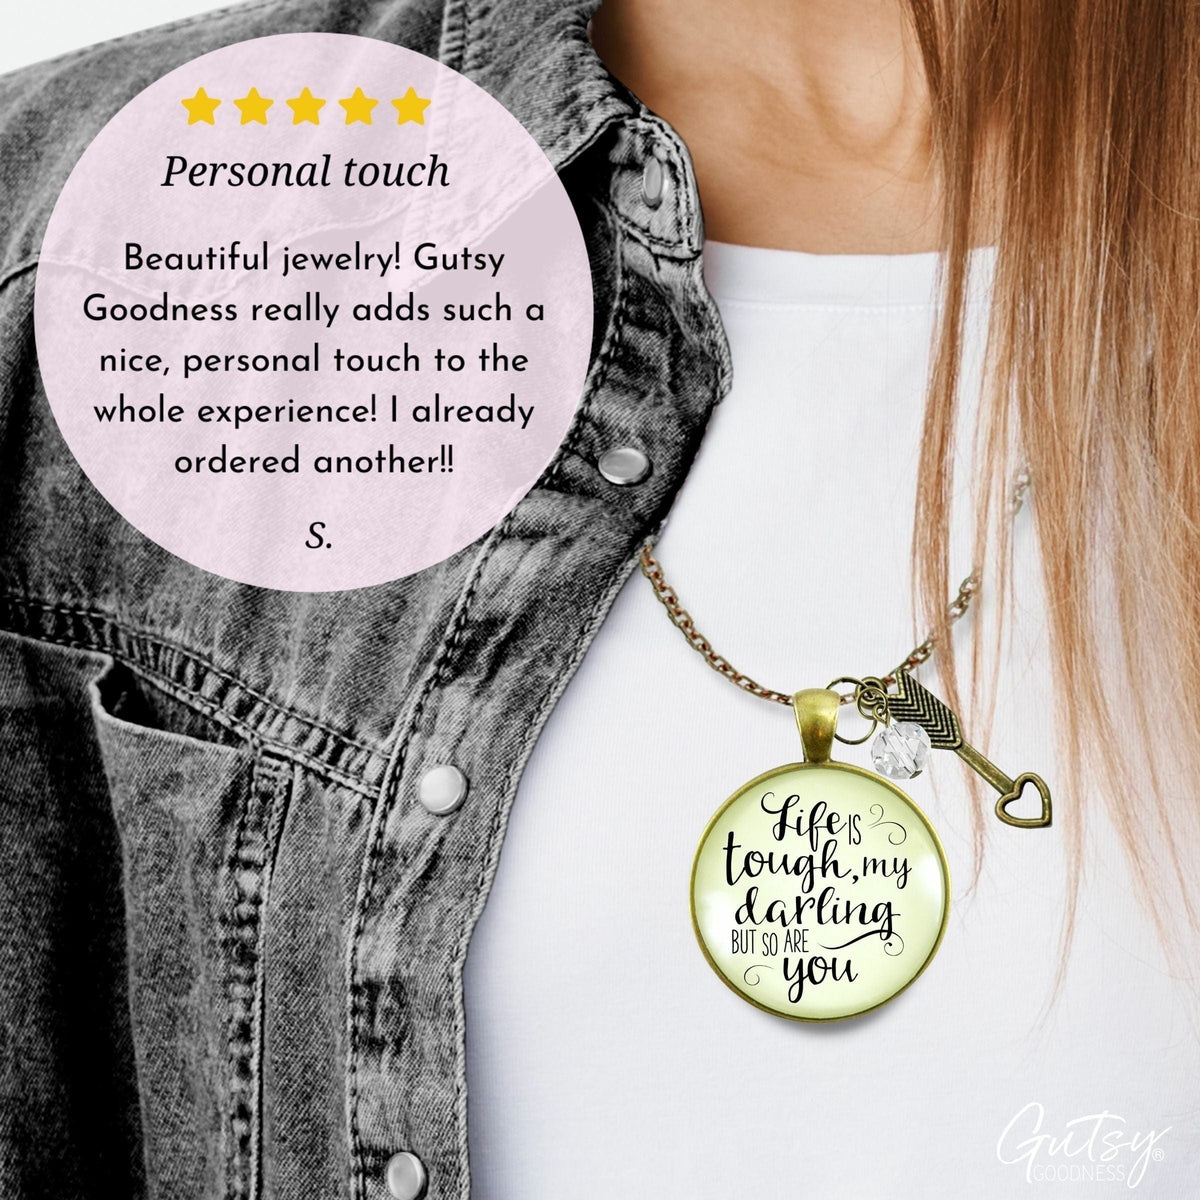 Gutsy Goodness Life is Tough My Darling Necklace Brave Quote Survivor Jewelry - Gutsy Goodness Handmade Jewelry;Life Is Tough My Darling Necklace Brave Quote Survivor Jewelry - Gutsy Goodness Handmade Jewelry Gifts